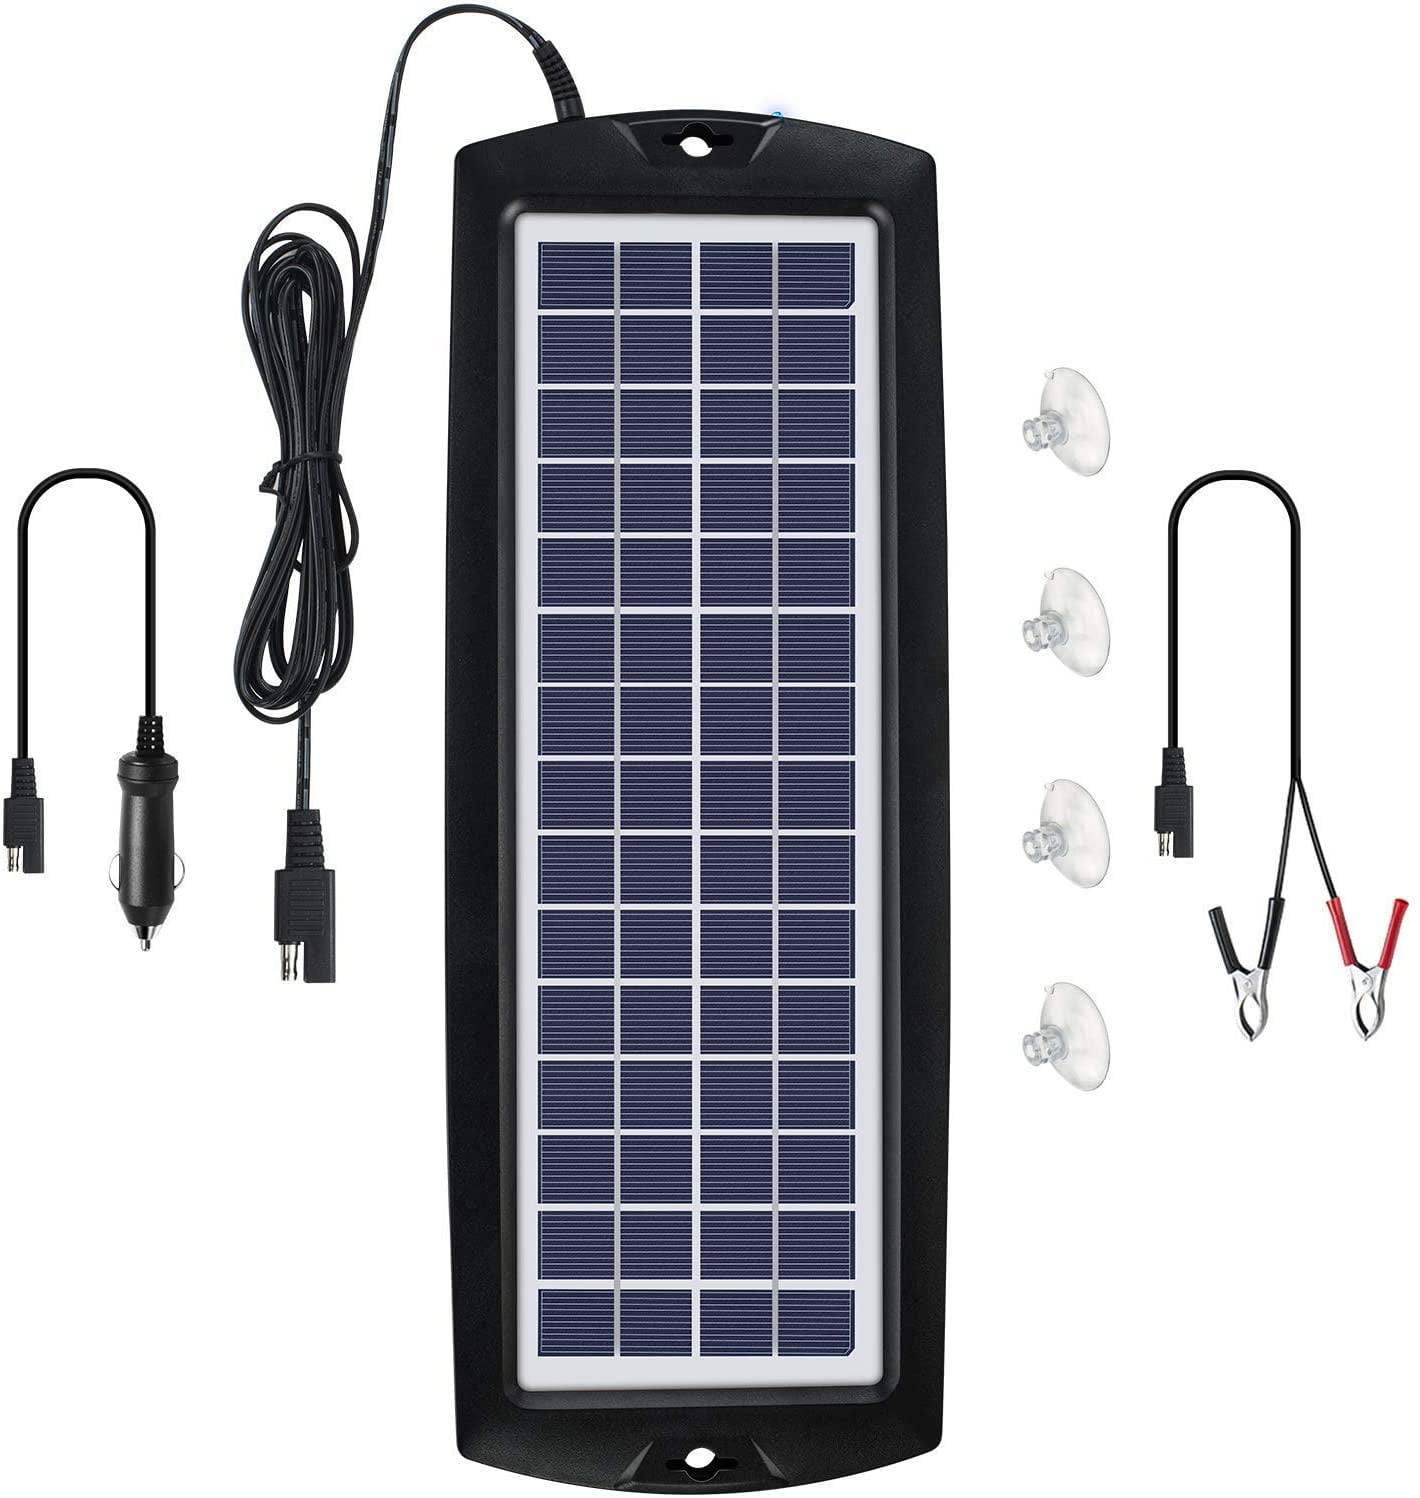 2W 12V Outdoor Charger Portable Phone Charger Solar Battery Panel Epoxy Board UP 